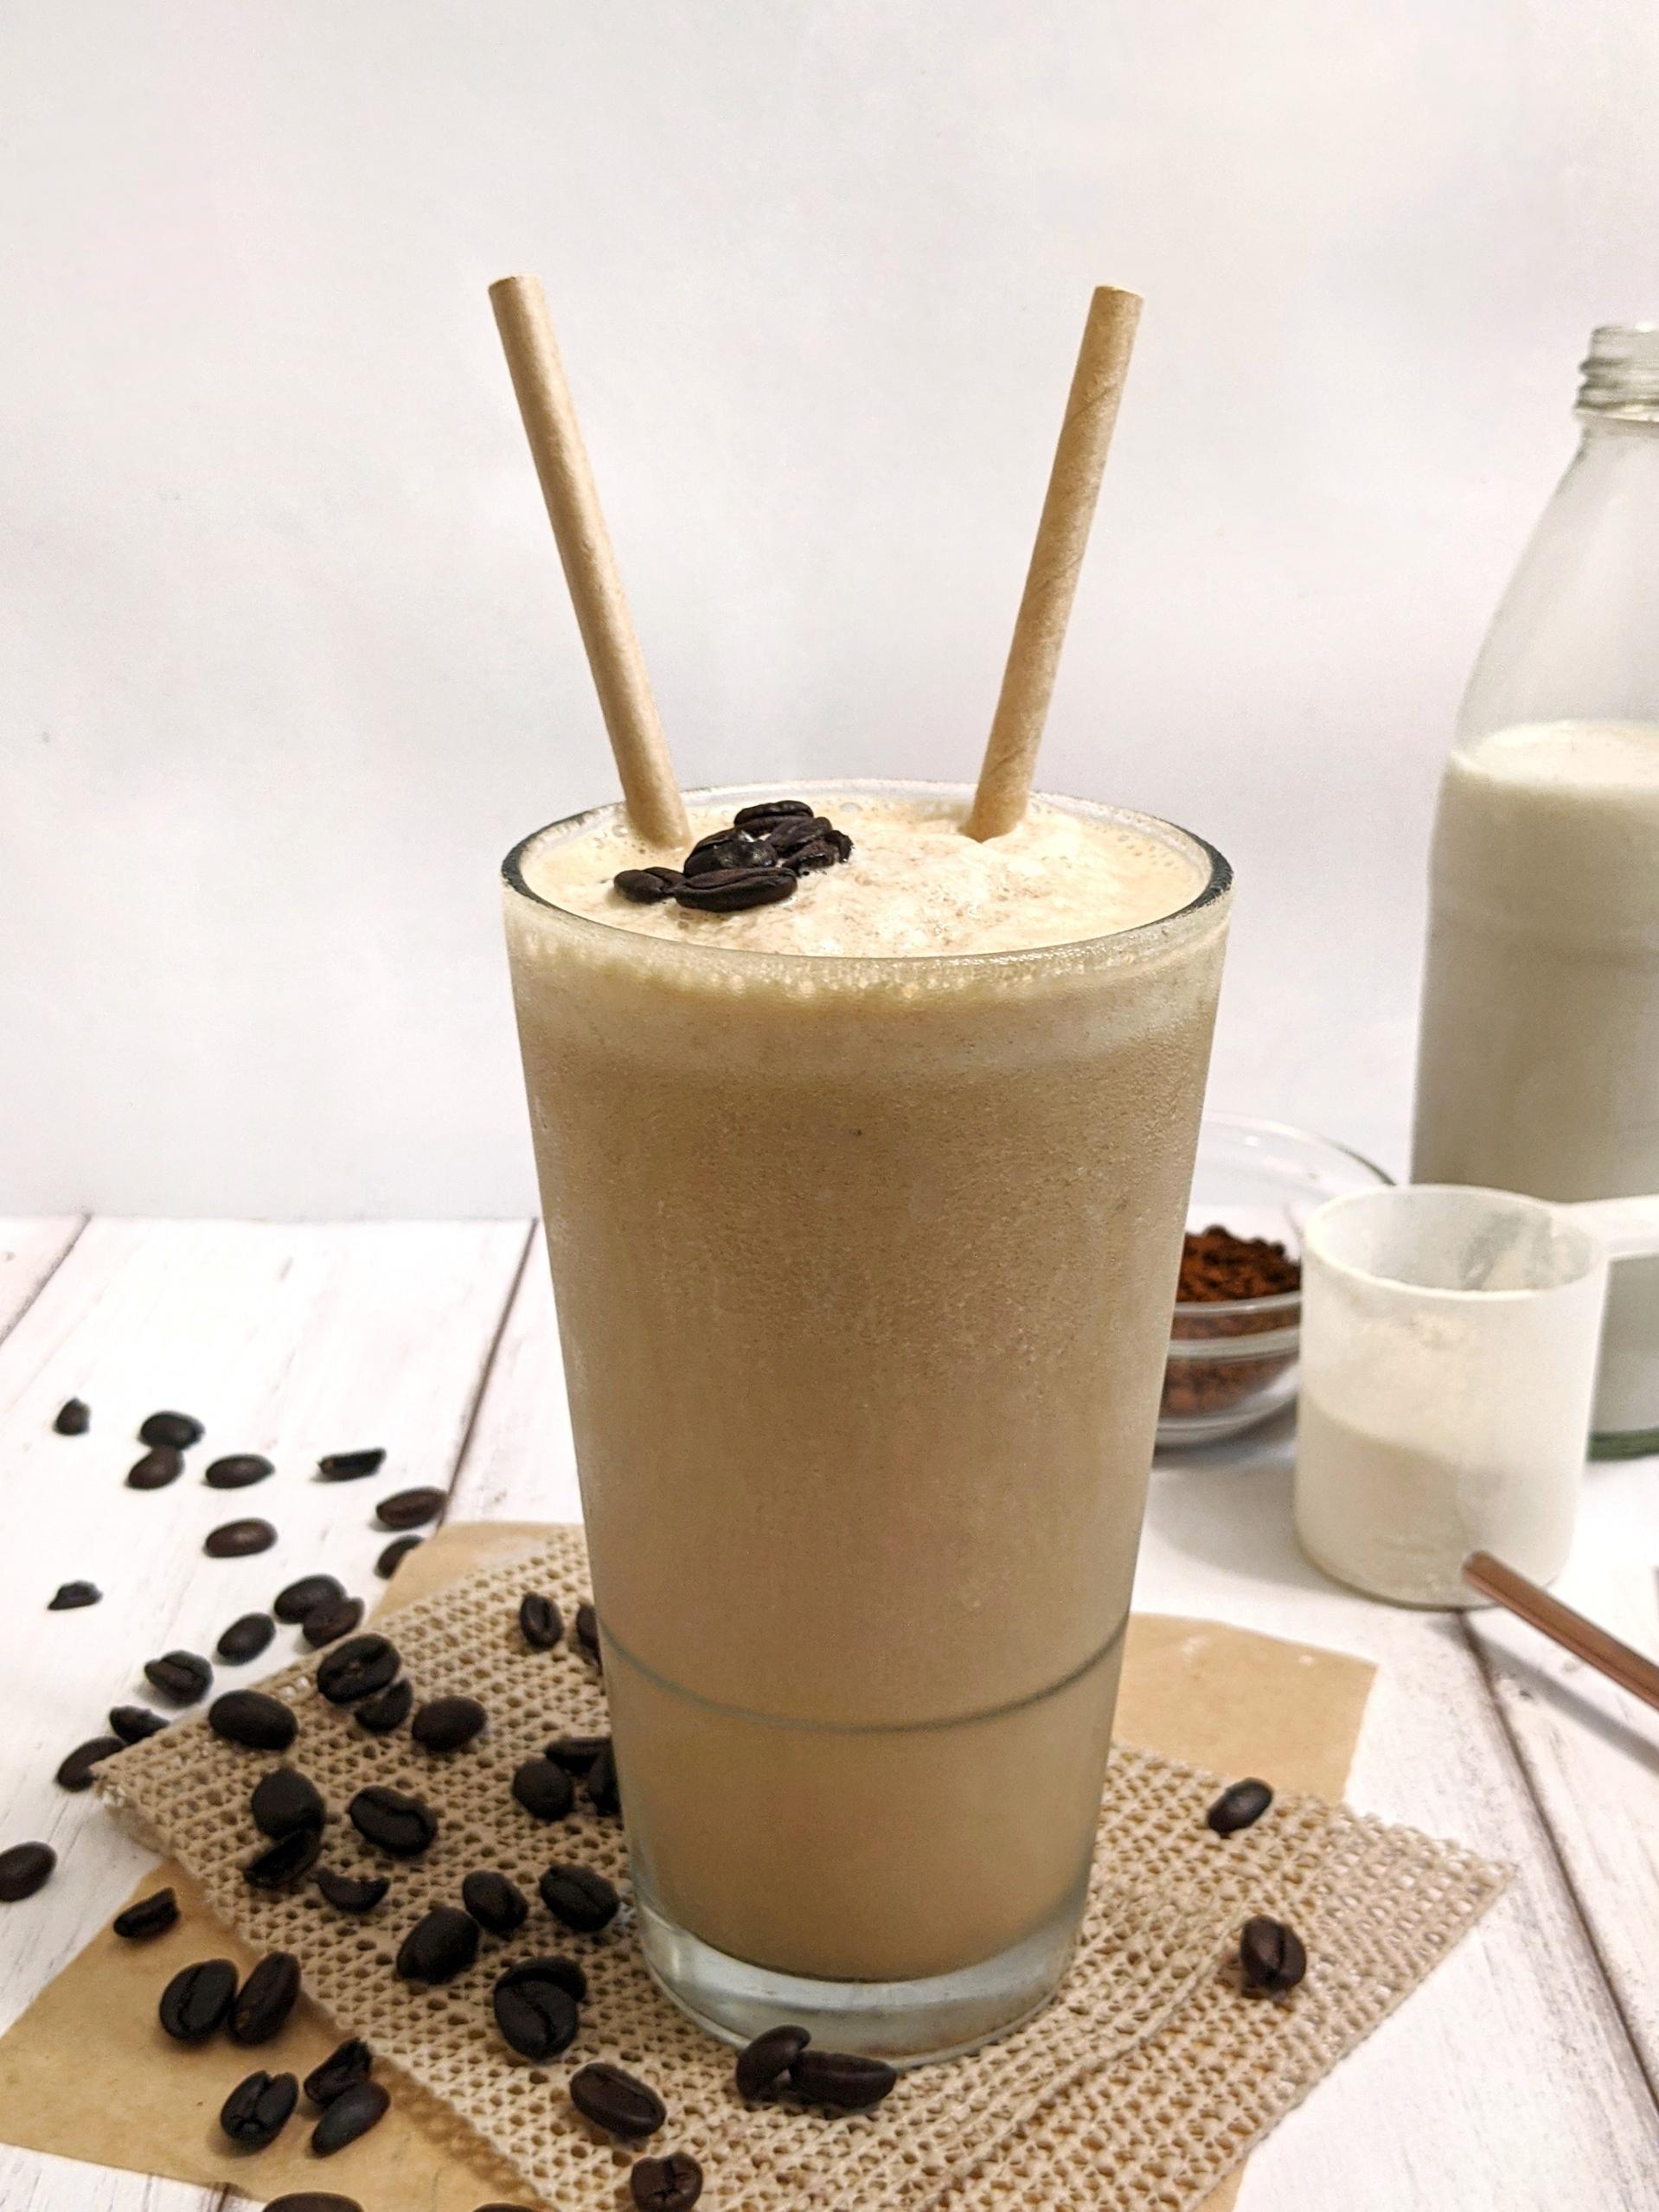  Start your morning off with a caffeine boost and a healthy dose of protein in this delicious shake.